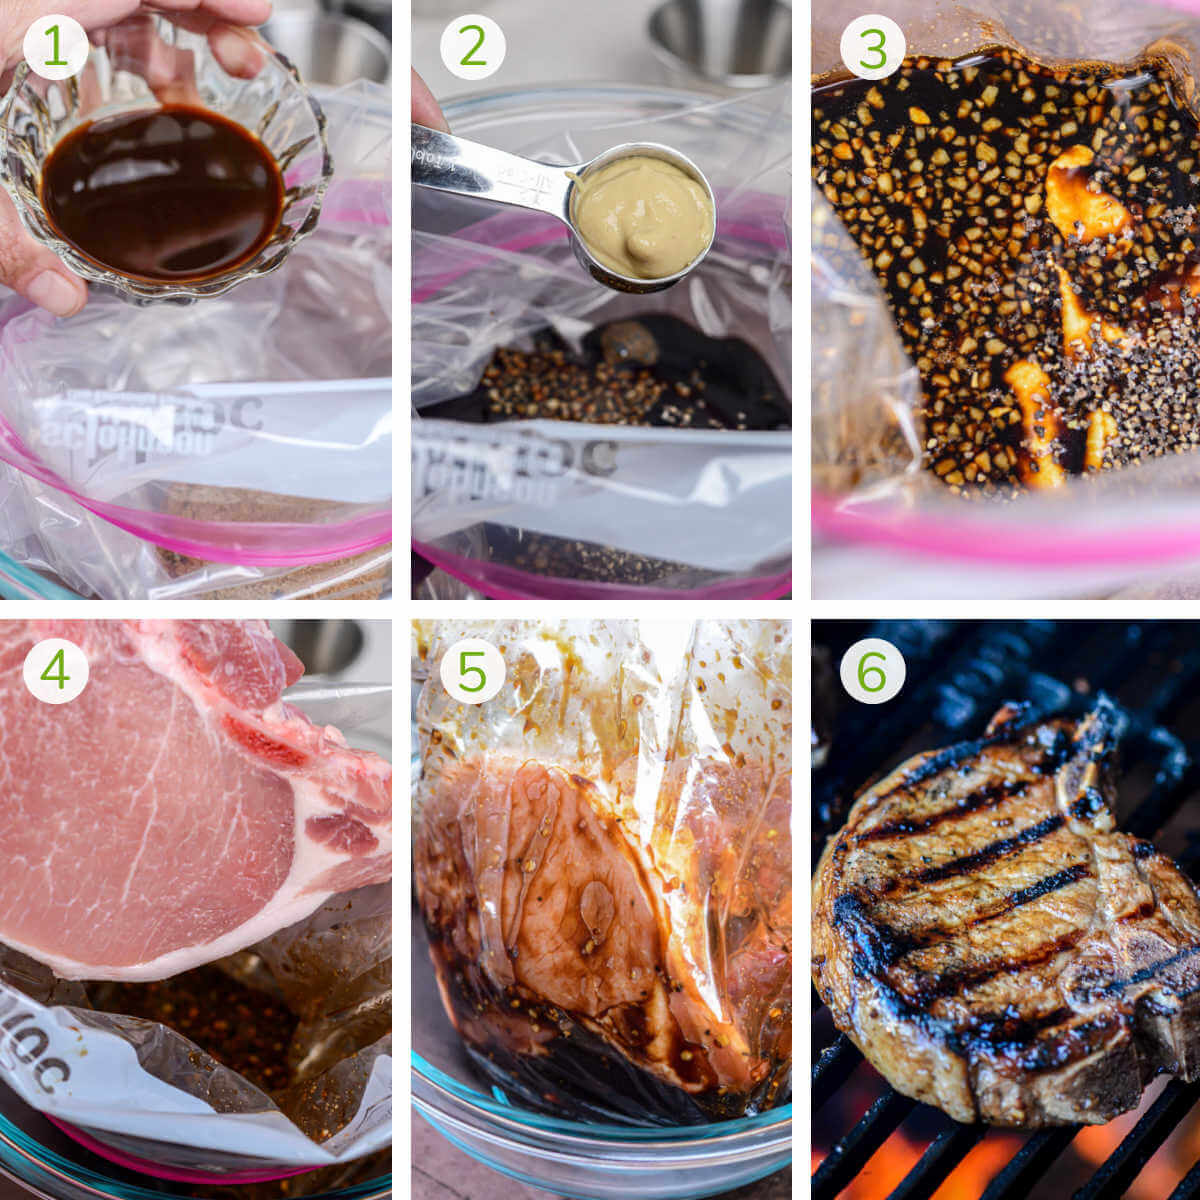 process photos showing adding the ingredients to a Ziploc bog, mixing it, adding the pork, letting it marinate and then grilling.